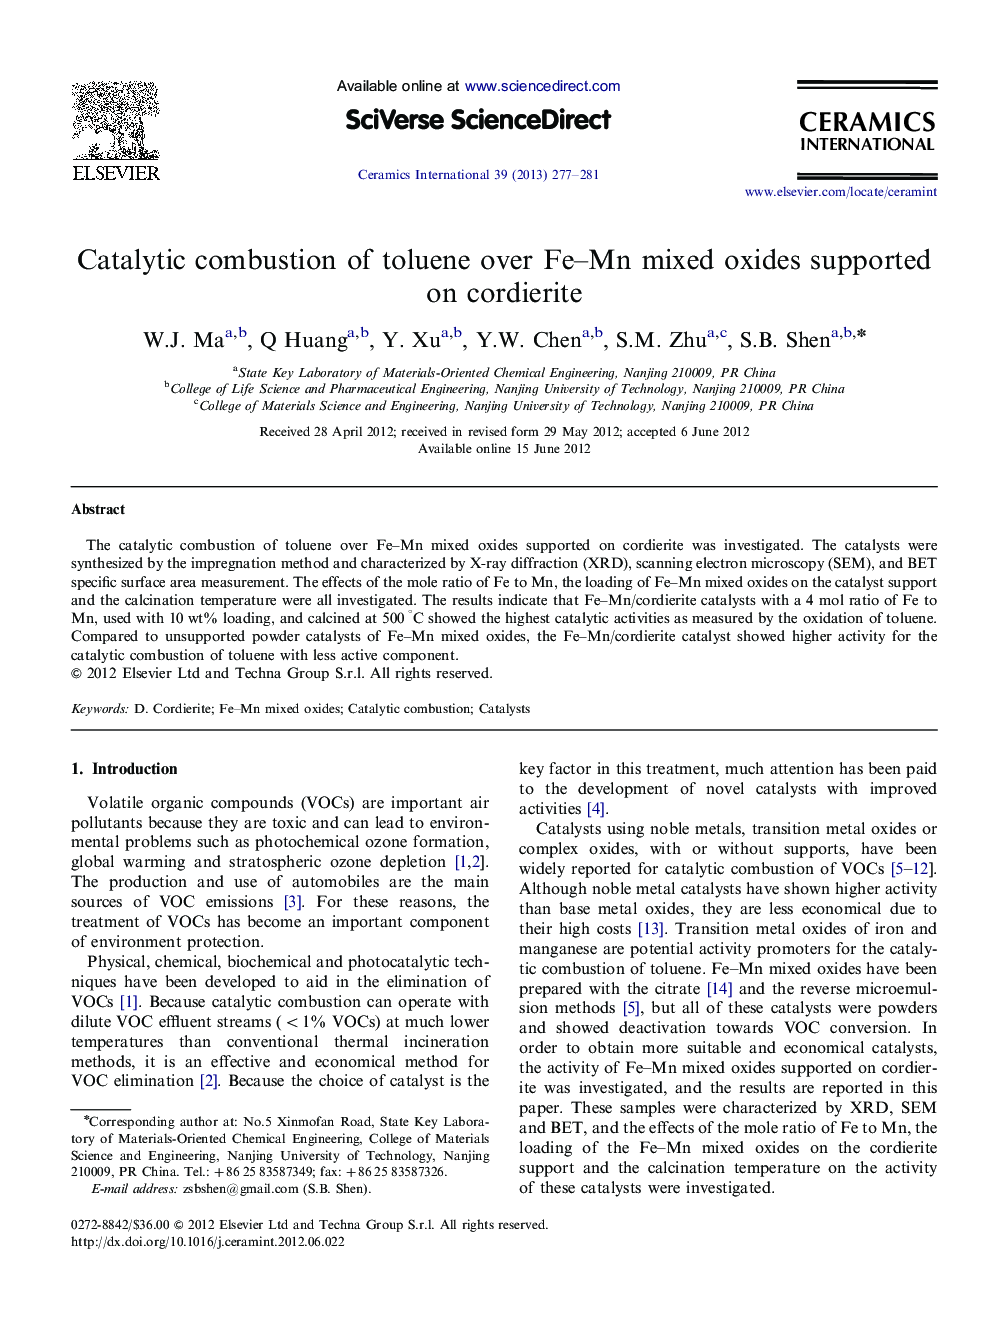 Catalytic combustion of toluene over Fe–Mn mixed oxides supported on cordierite